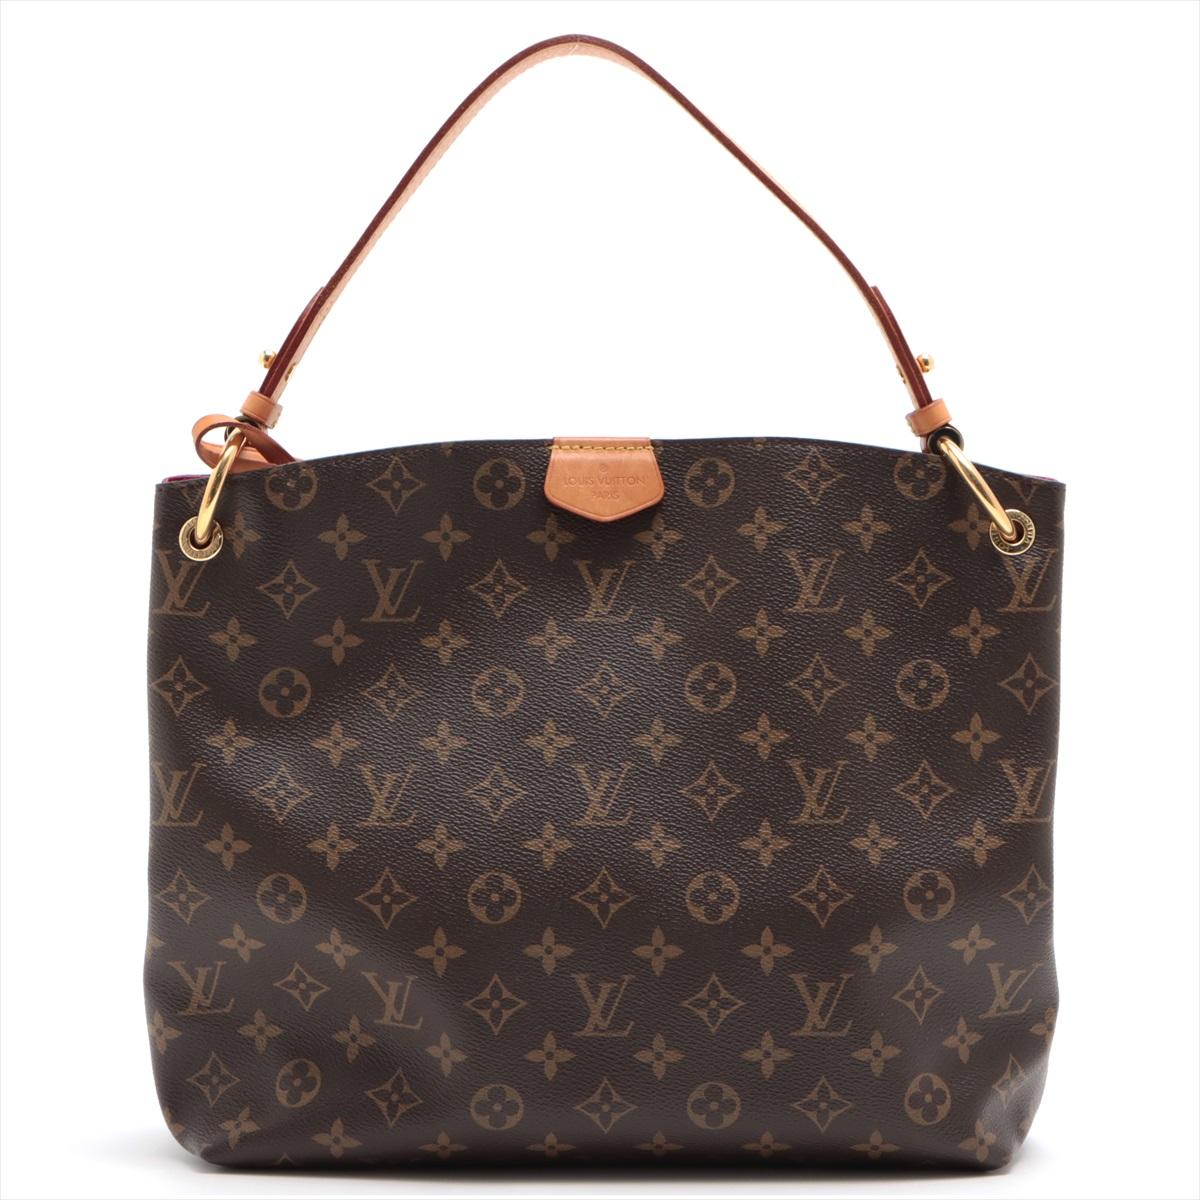 The Louis Vuitton Monogram Graceful PM is an elegant and compact handbag designed for the modern woman who values both style and practicality. The bag is crafted from the brand's iconic Monogram canvas. The signature canvas features a rich brown